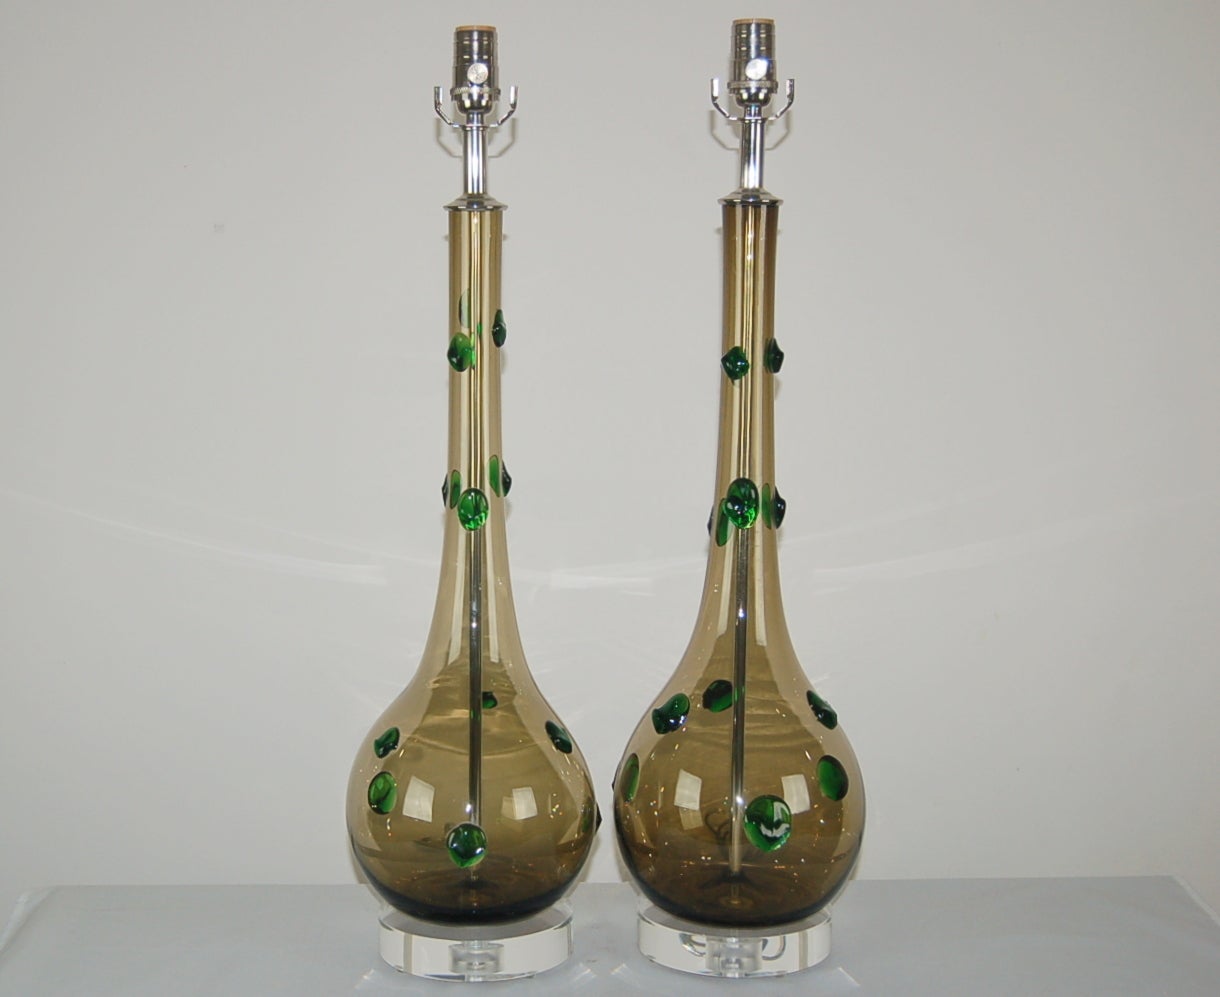 Matched pair of vintage Murano table lamps. A very elegant pair of vintage Murano lamps in SMOKEY BRONZE with prunts of EMERALD GREEN. These are a beautifully matched pair. 

They stand 28 inches from tabletop to socket top. As shown, the top of